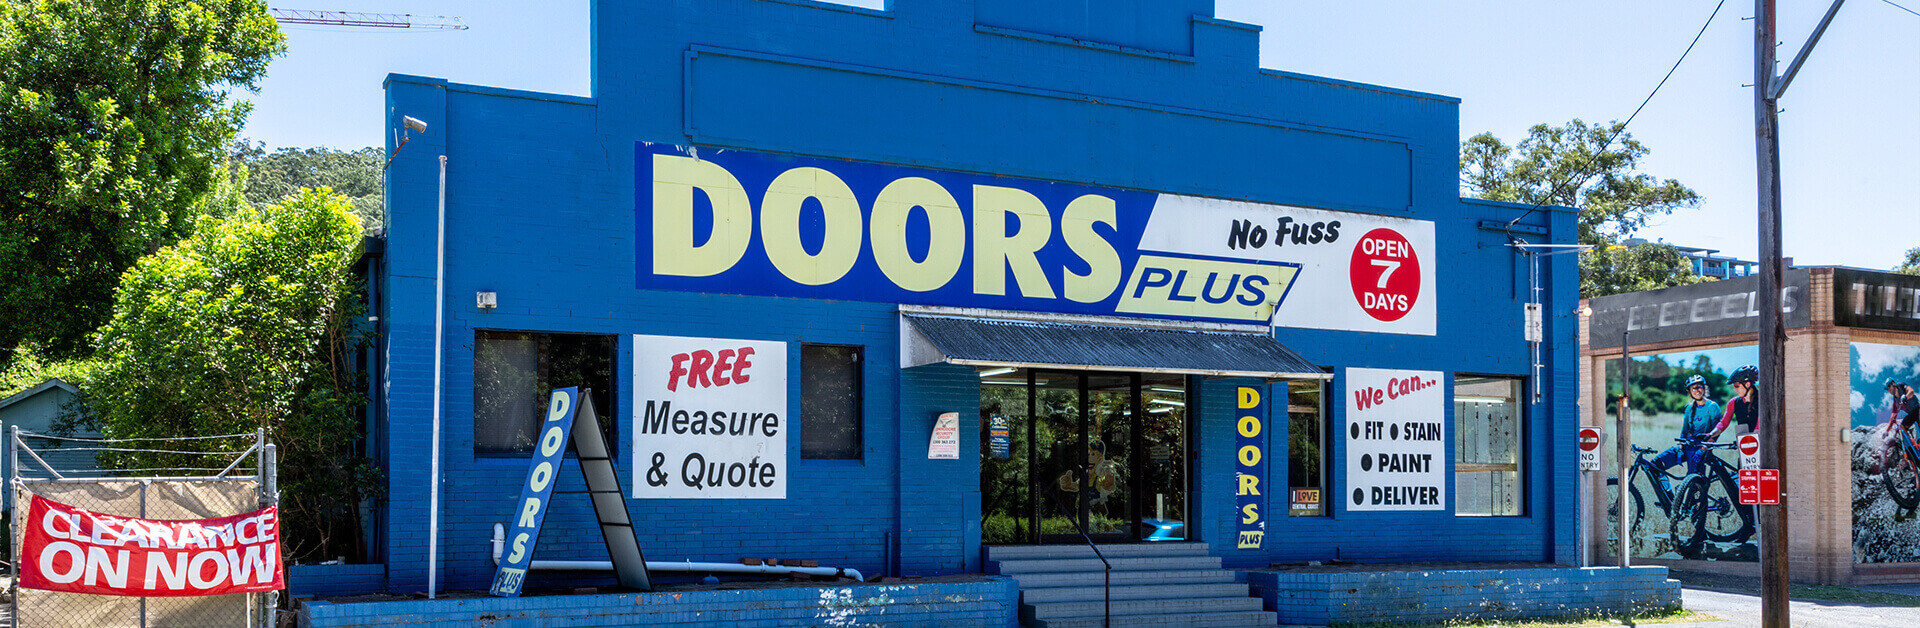 Doors Plus Gosford West Showroom in New South Wales in Blue Paint entrance view